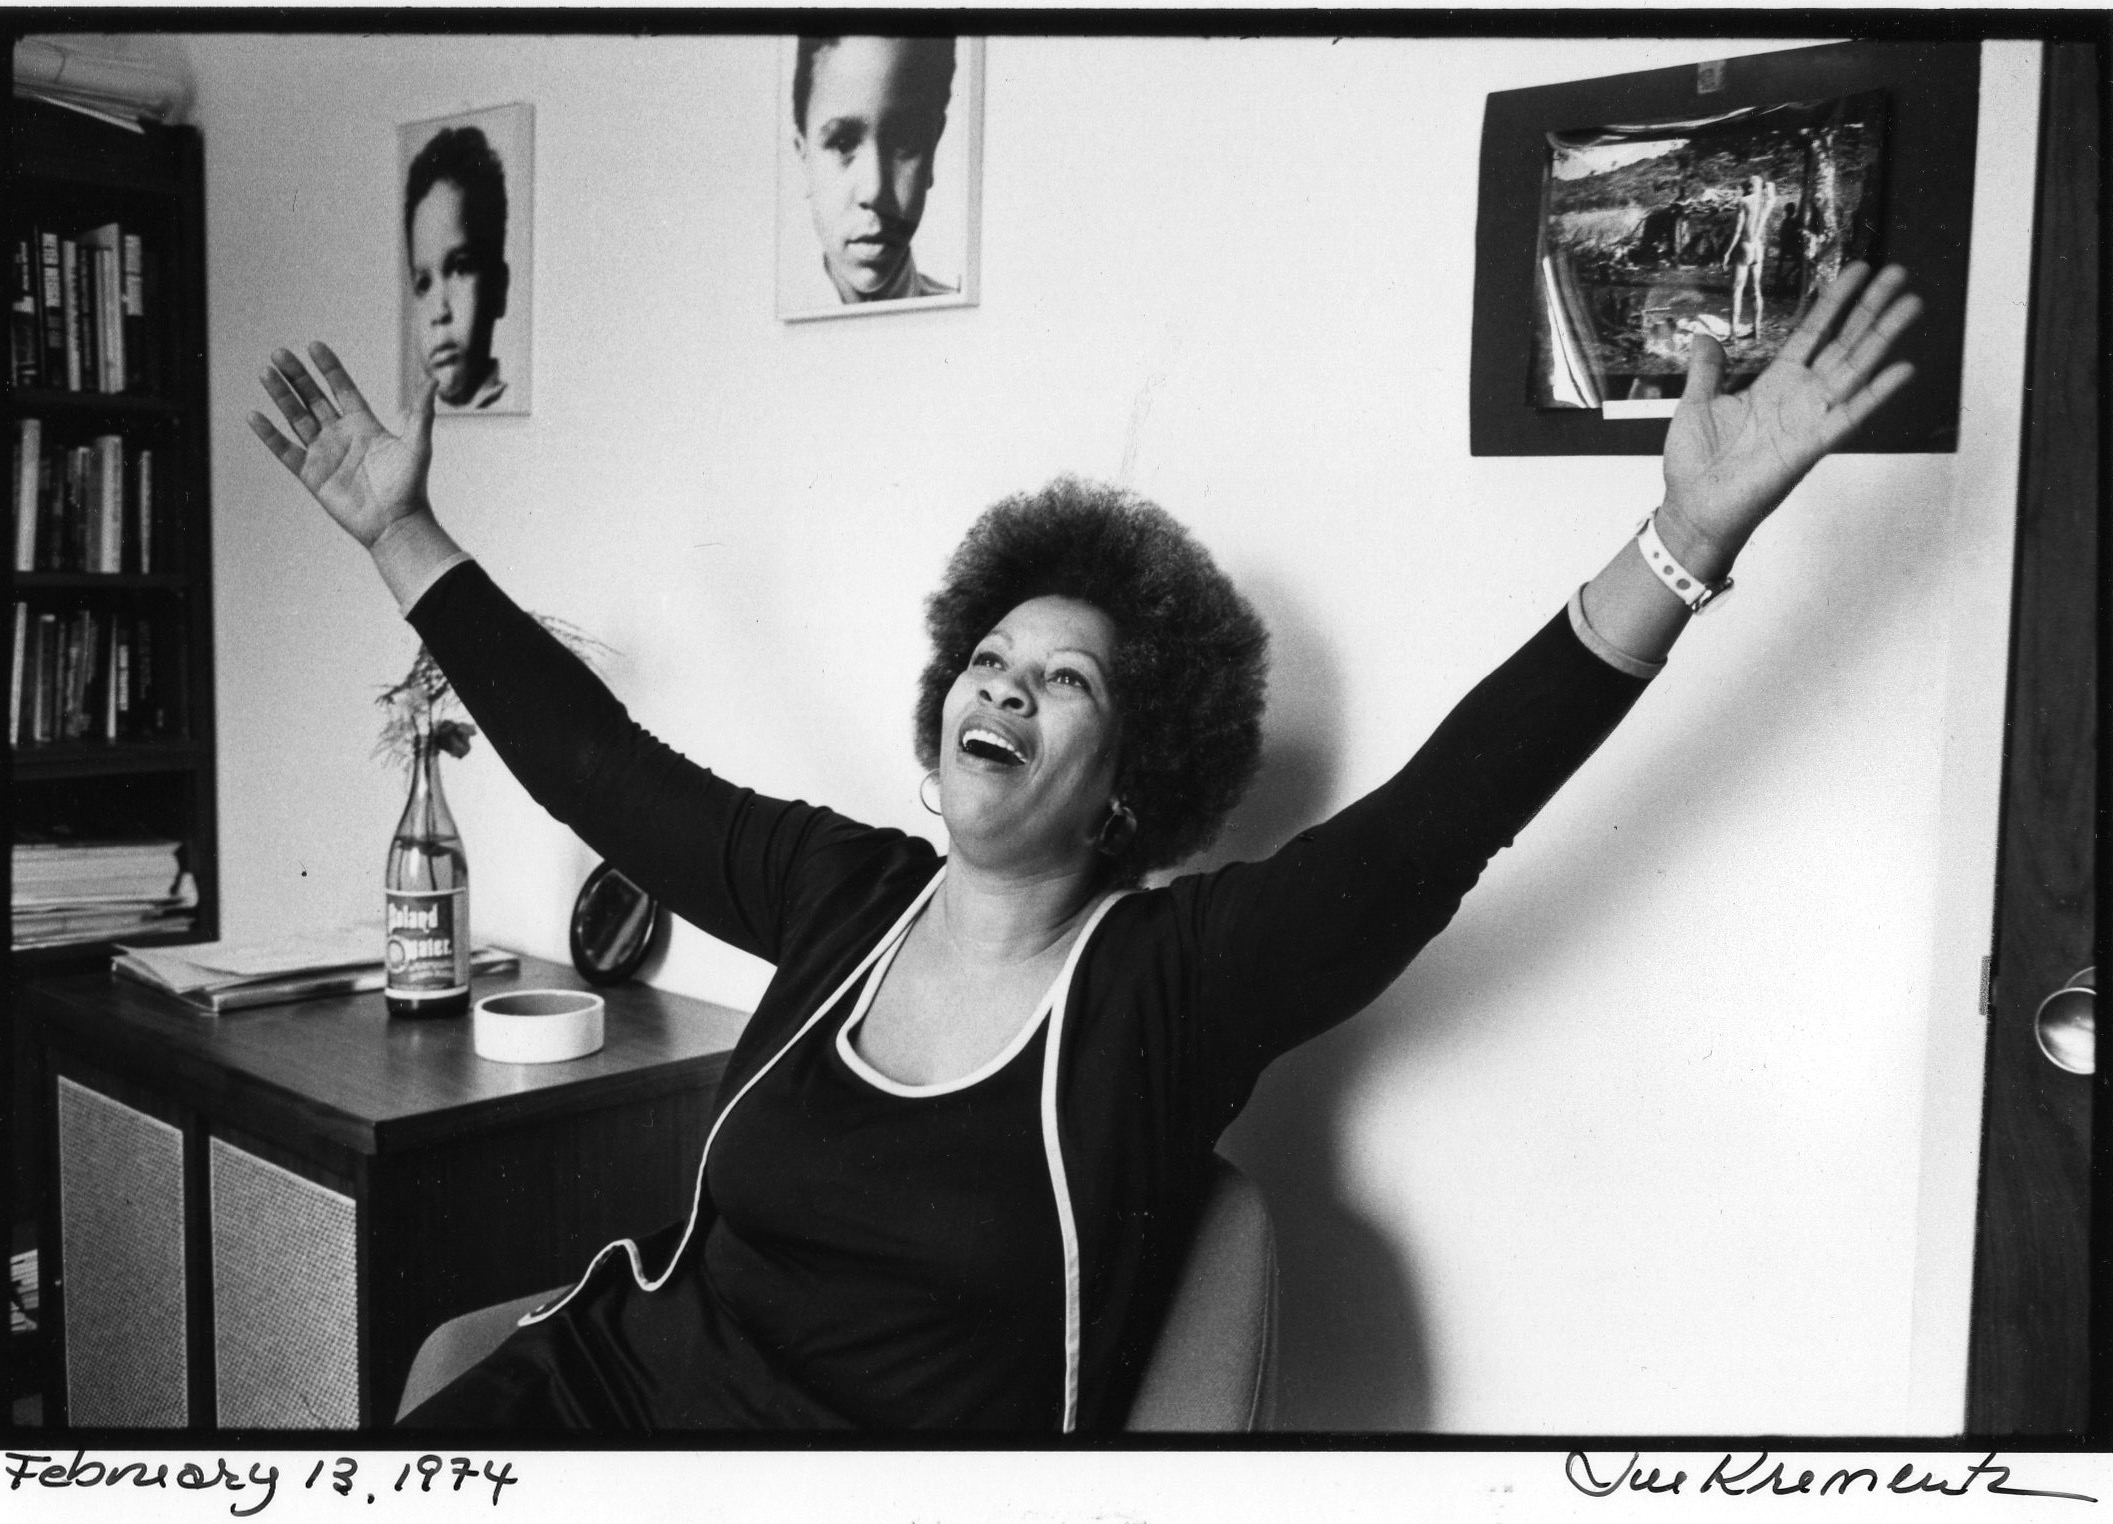 Morrison, in her office at Random House, on Feb. 13, 1974 (Photograph © by Jill Krementz; All Rights Reserved)